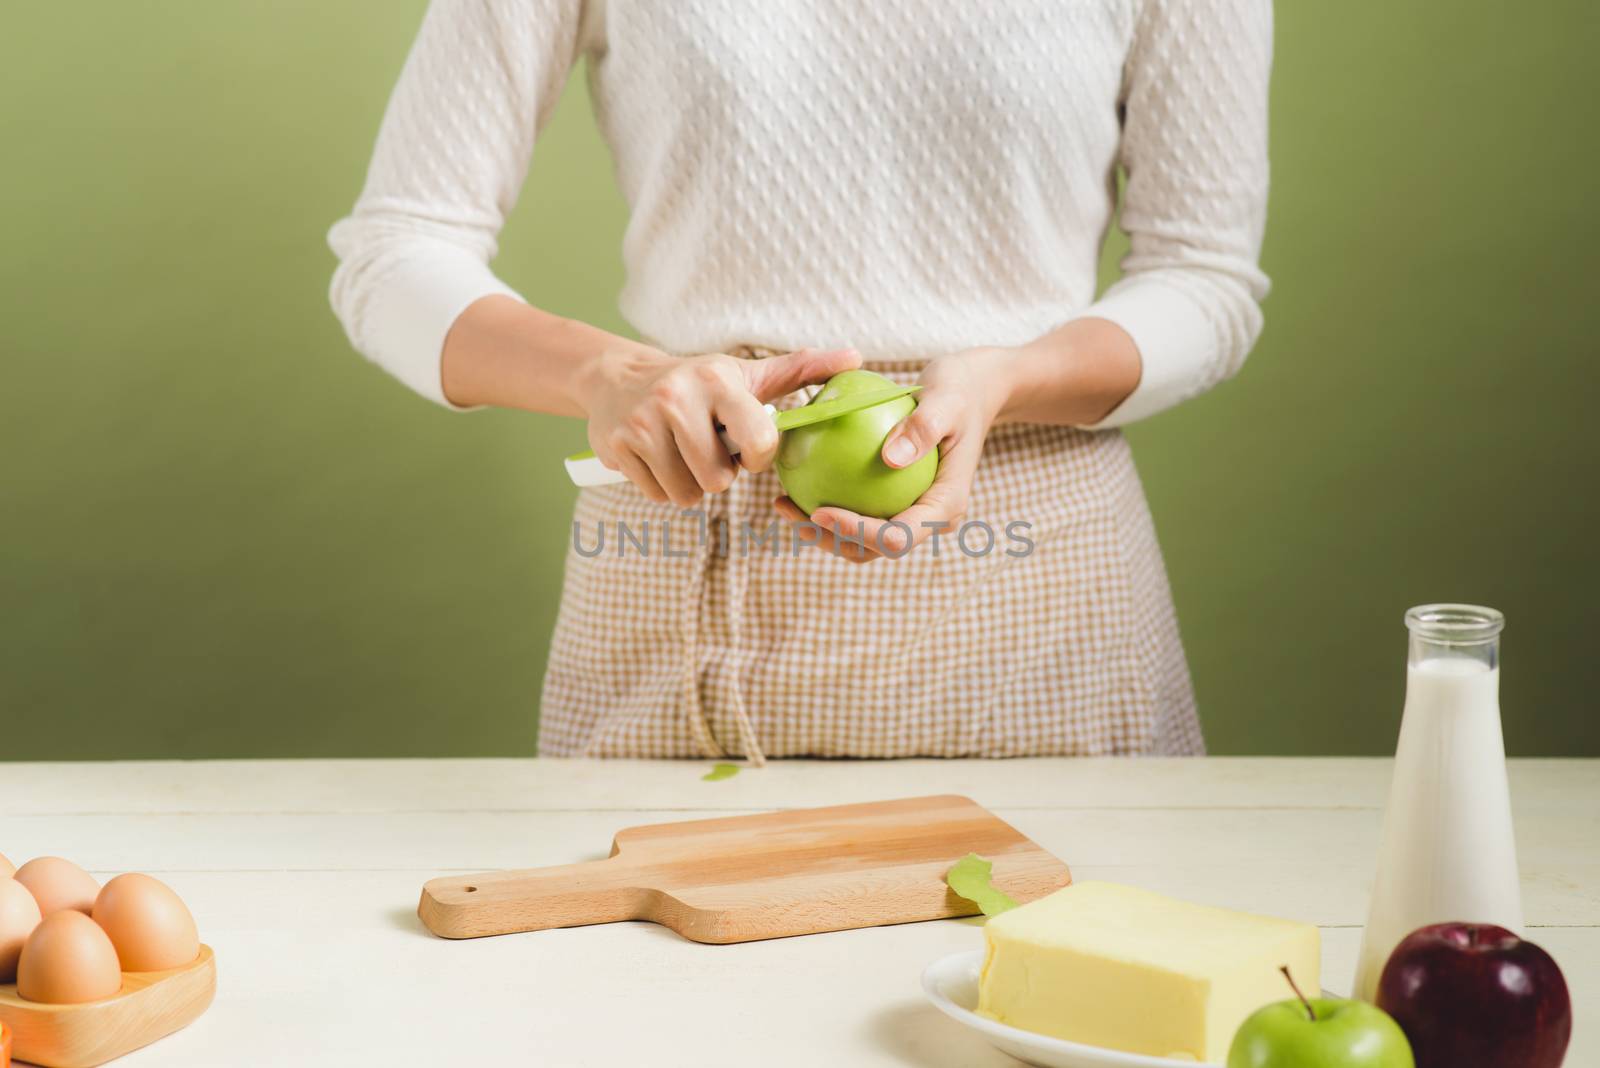 House wife wearing apron making. Steps of making cooking apple cake. Cutting green apple.